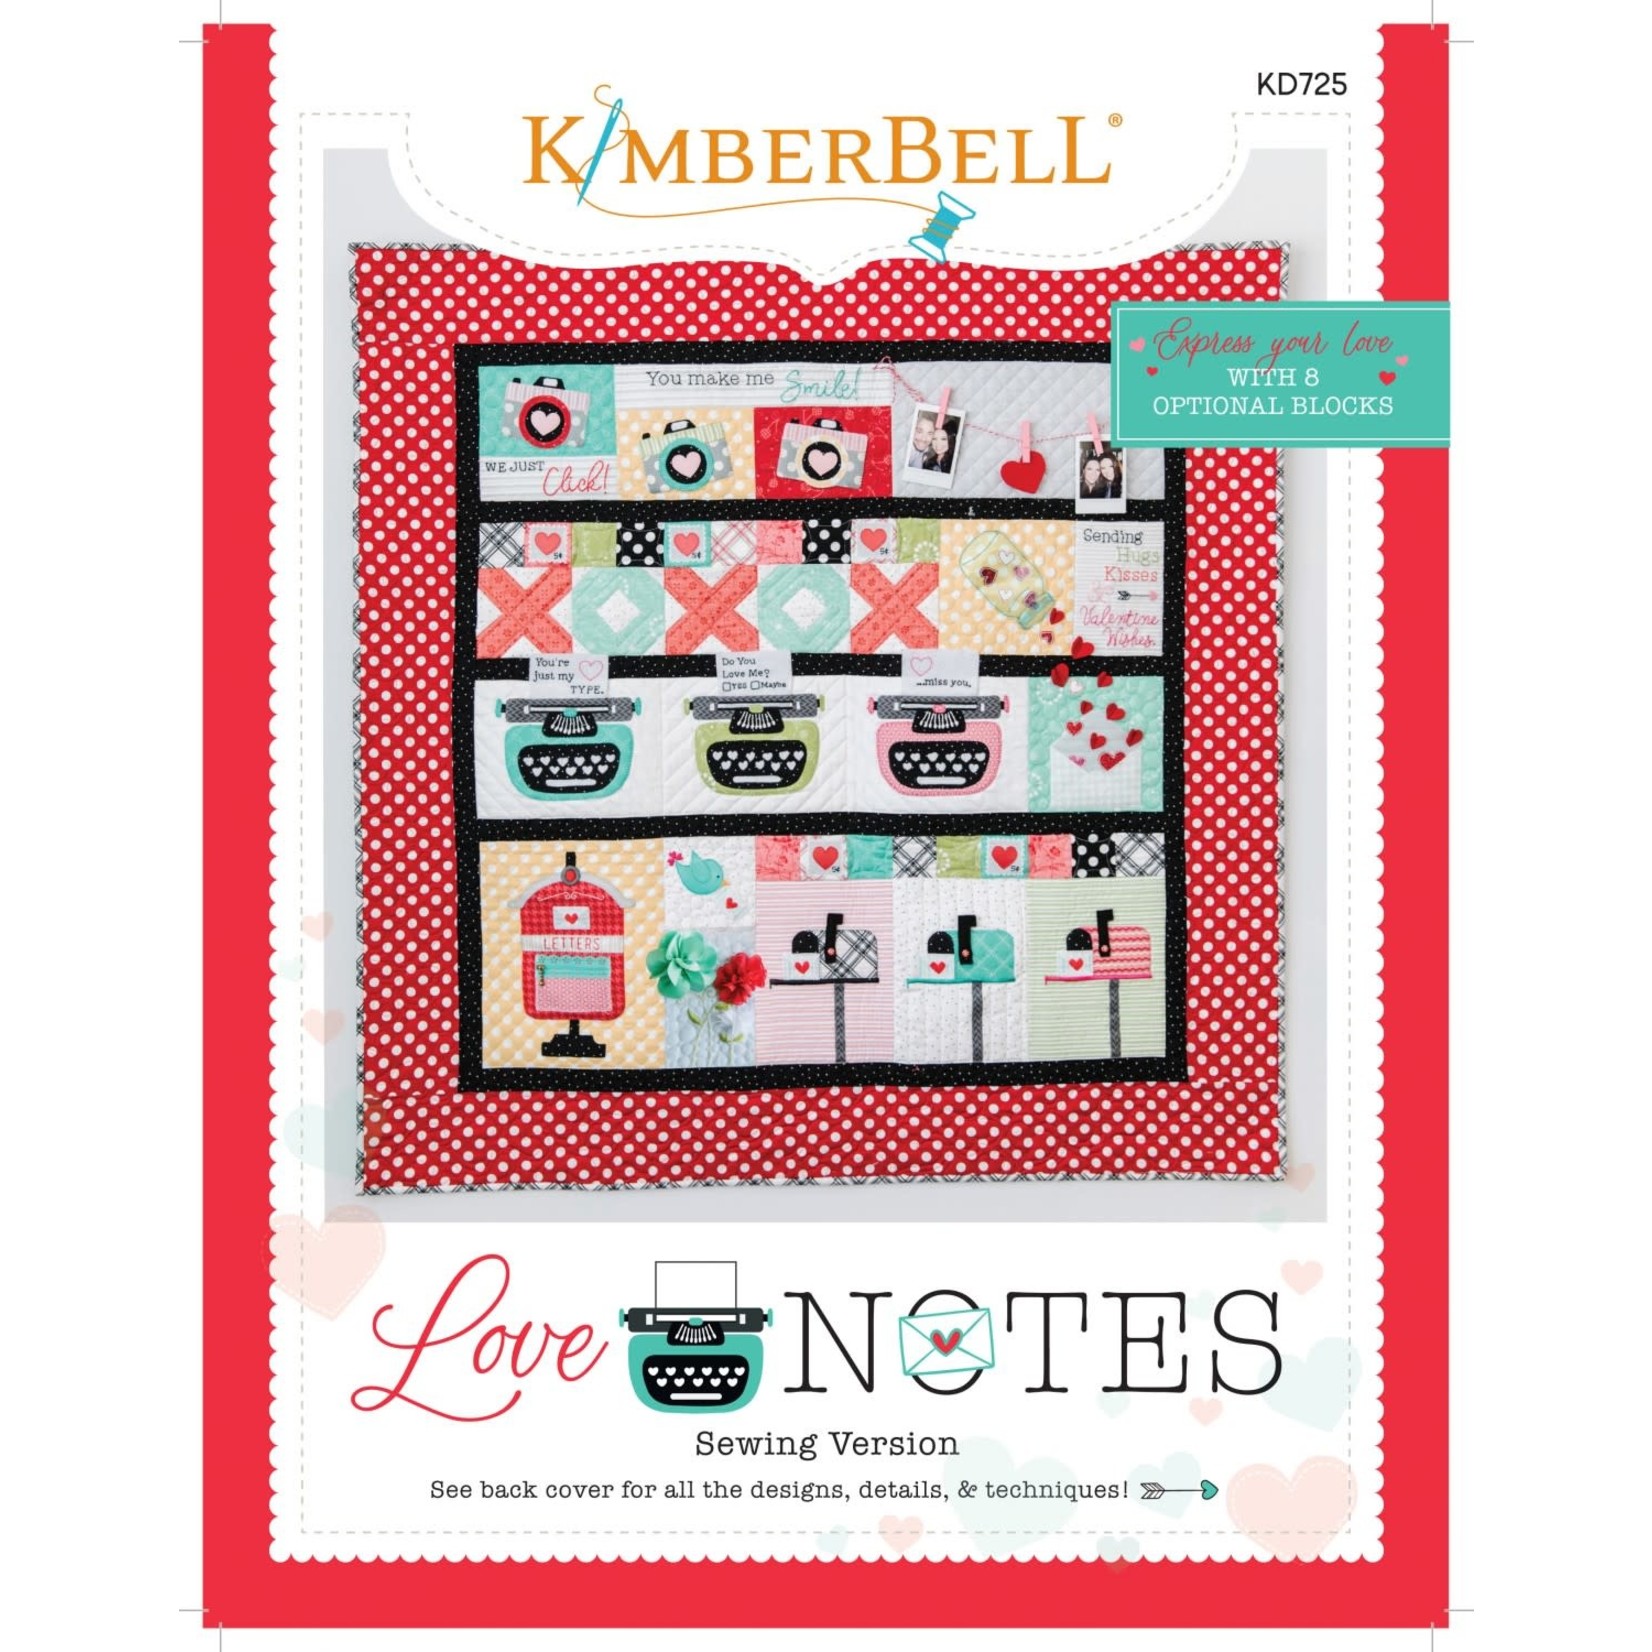 Kimberbell Designs Love Notes (Sewing Version) Pattern